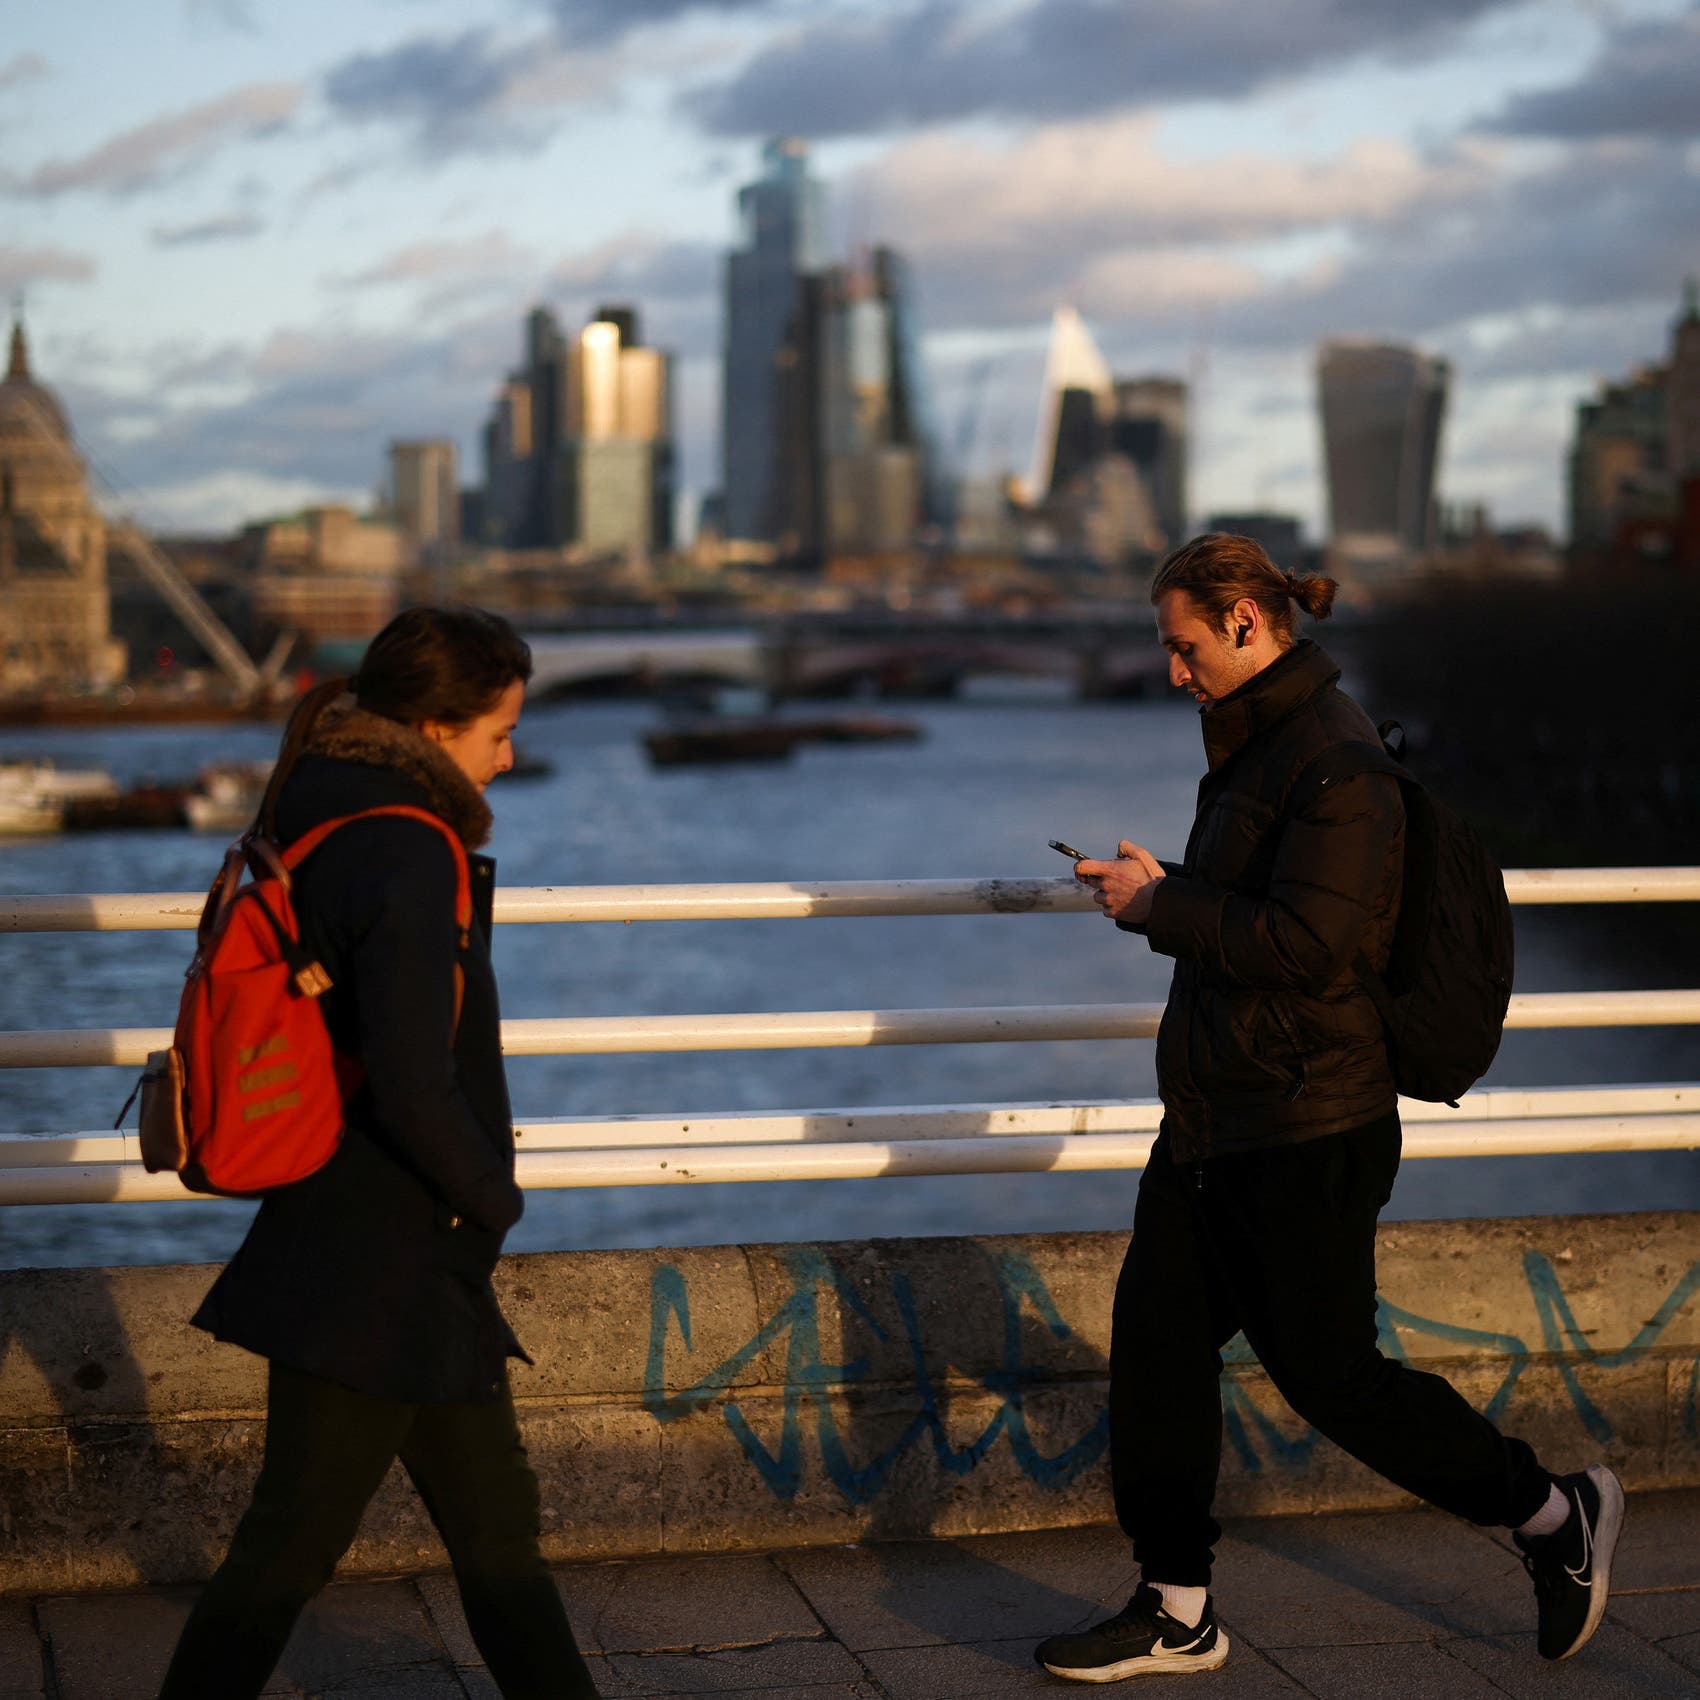 Taking 5-minute walks every half-hour can offset health risks of prolonged sitting